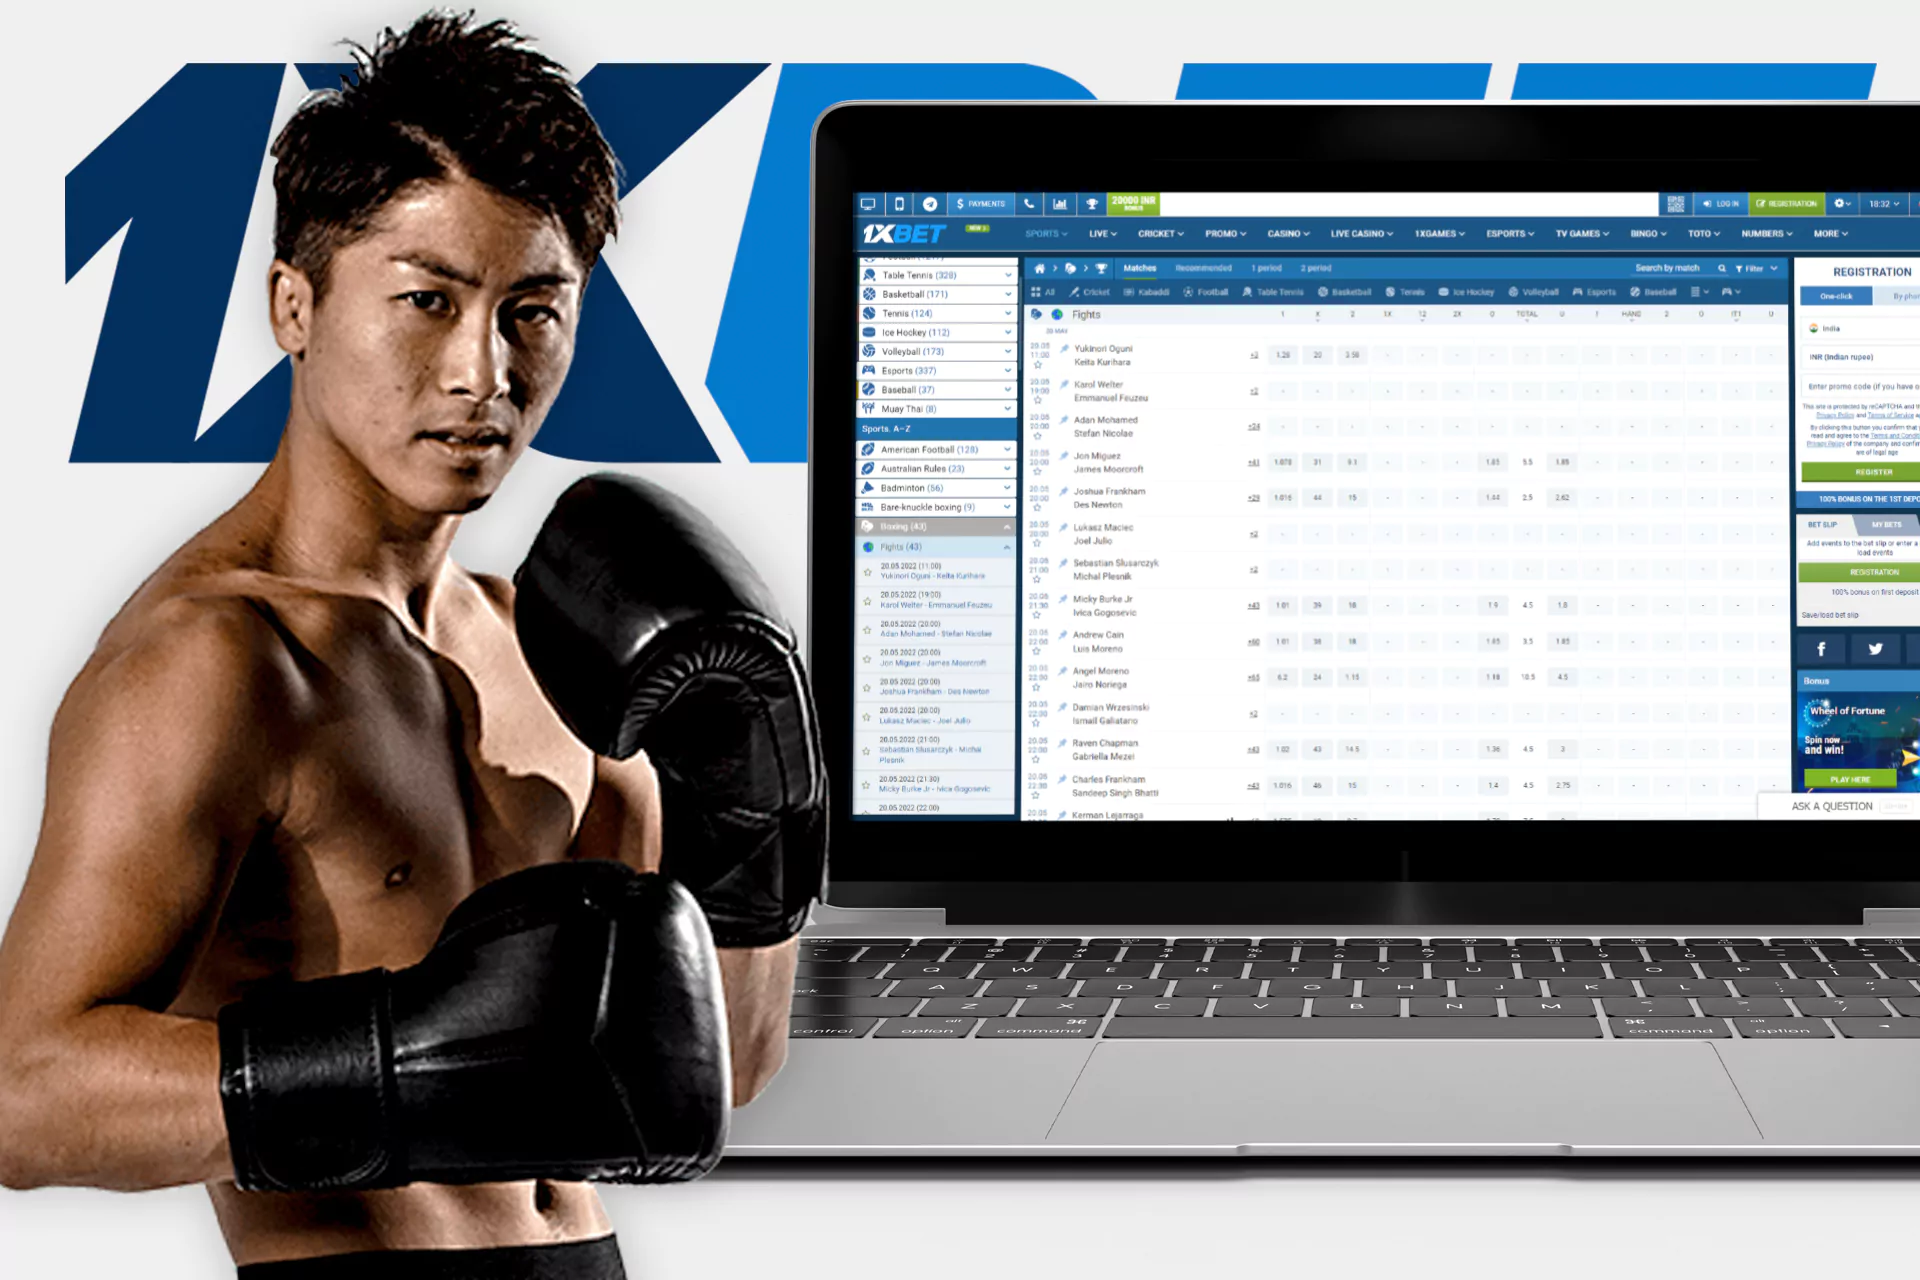 To bet on UFC register a 1xBet account and make a deposit.